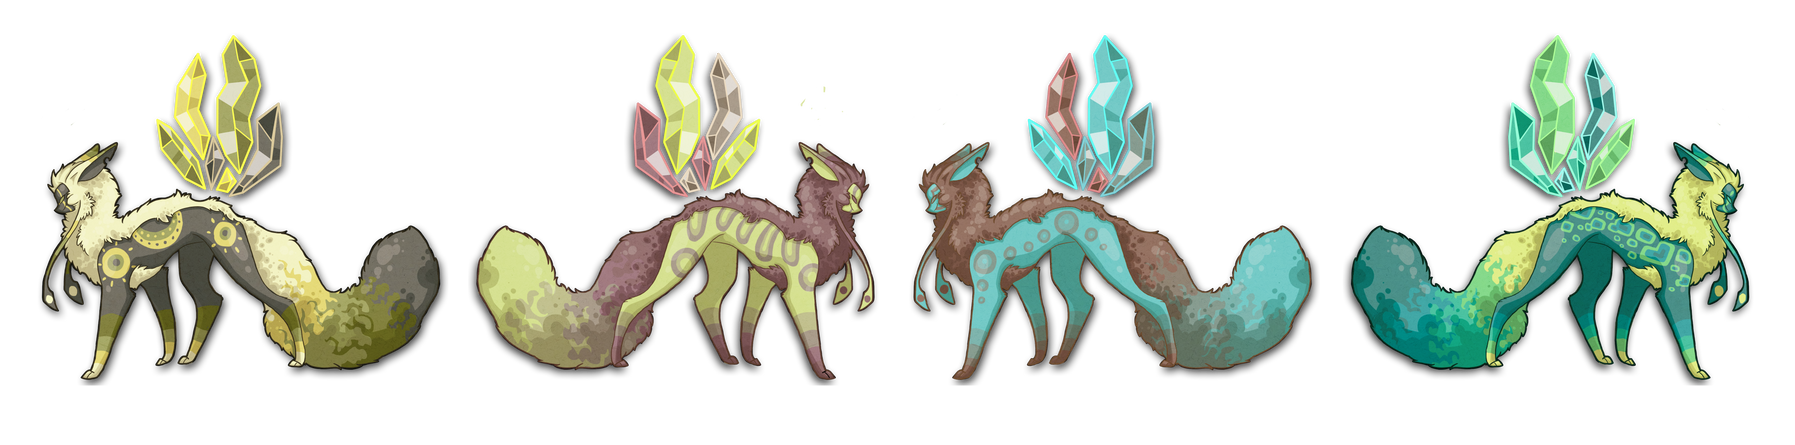 unnamed creature adoptables auction